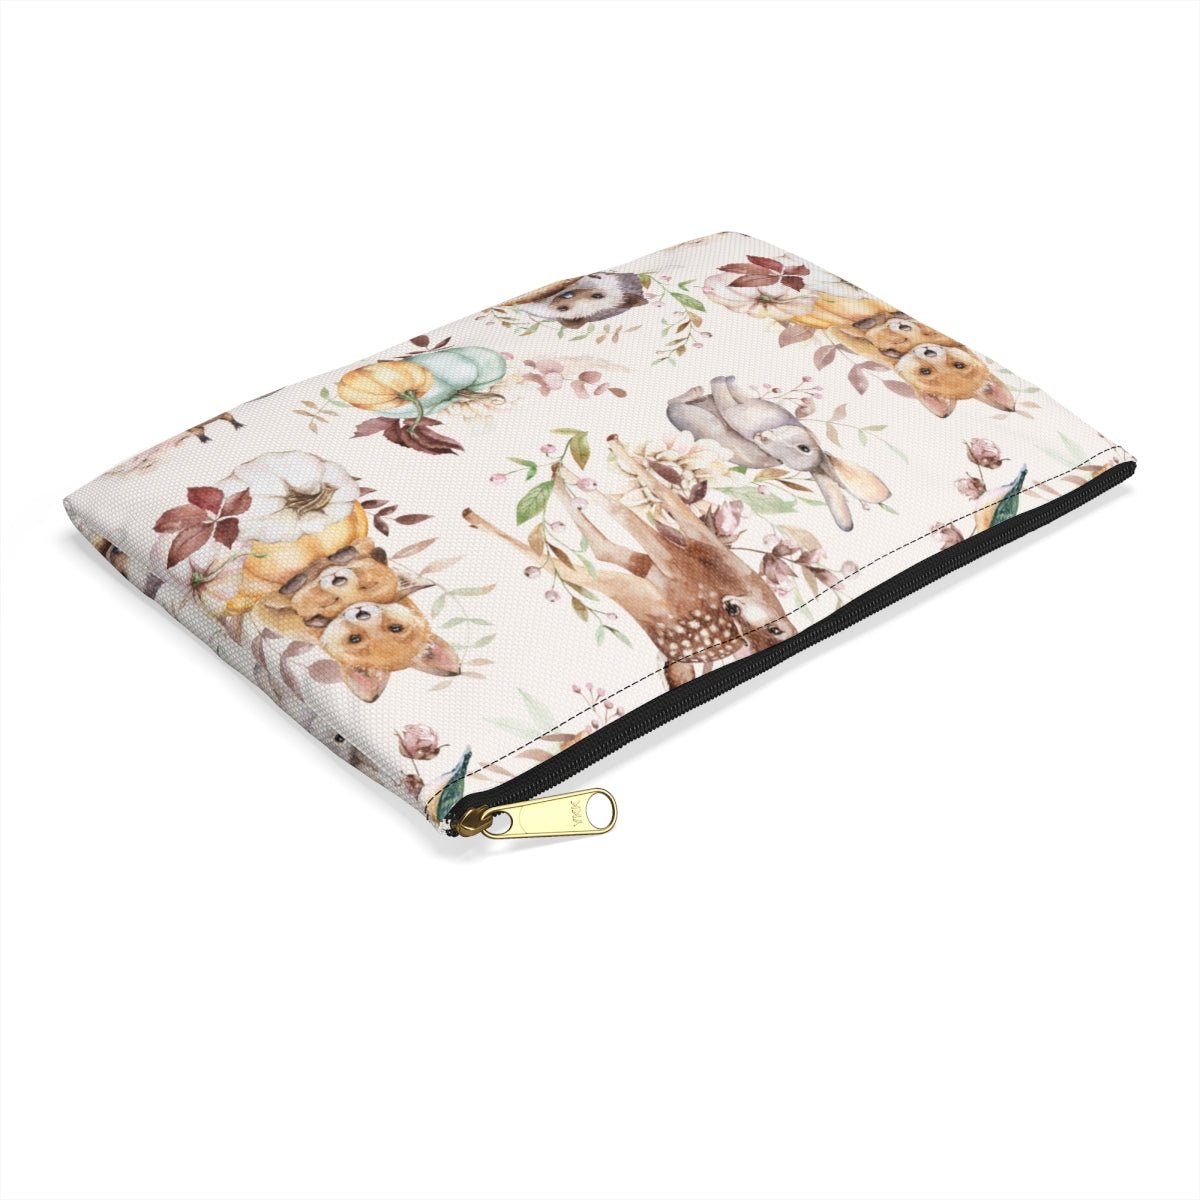 Woodland Animals Accessory Pouch - Puffin Lime